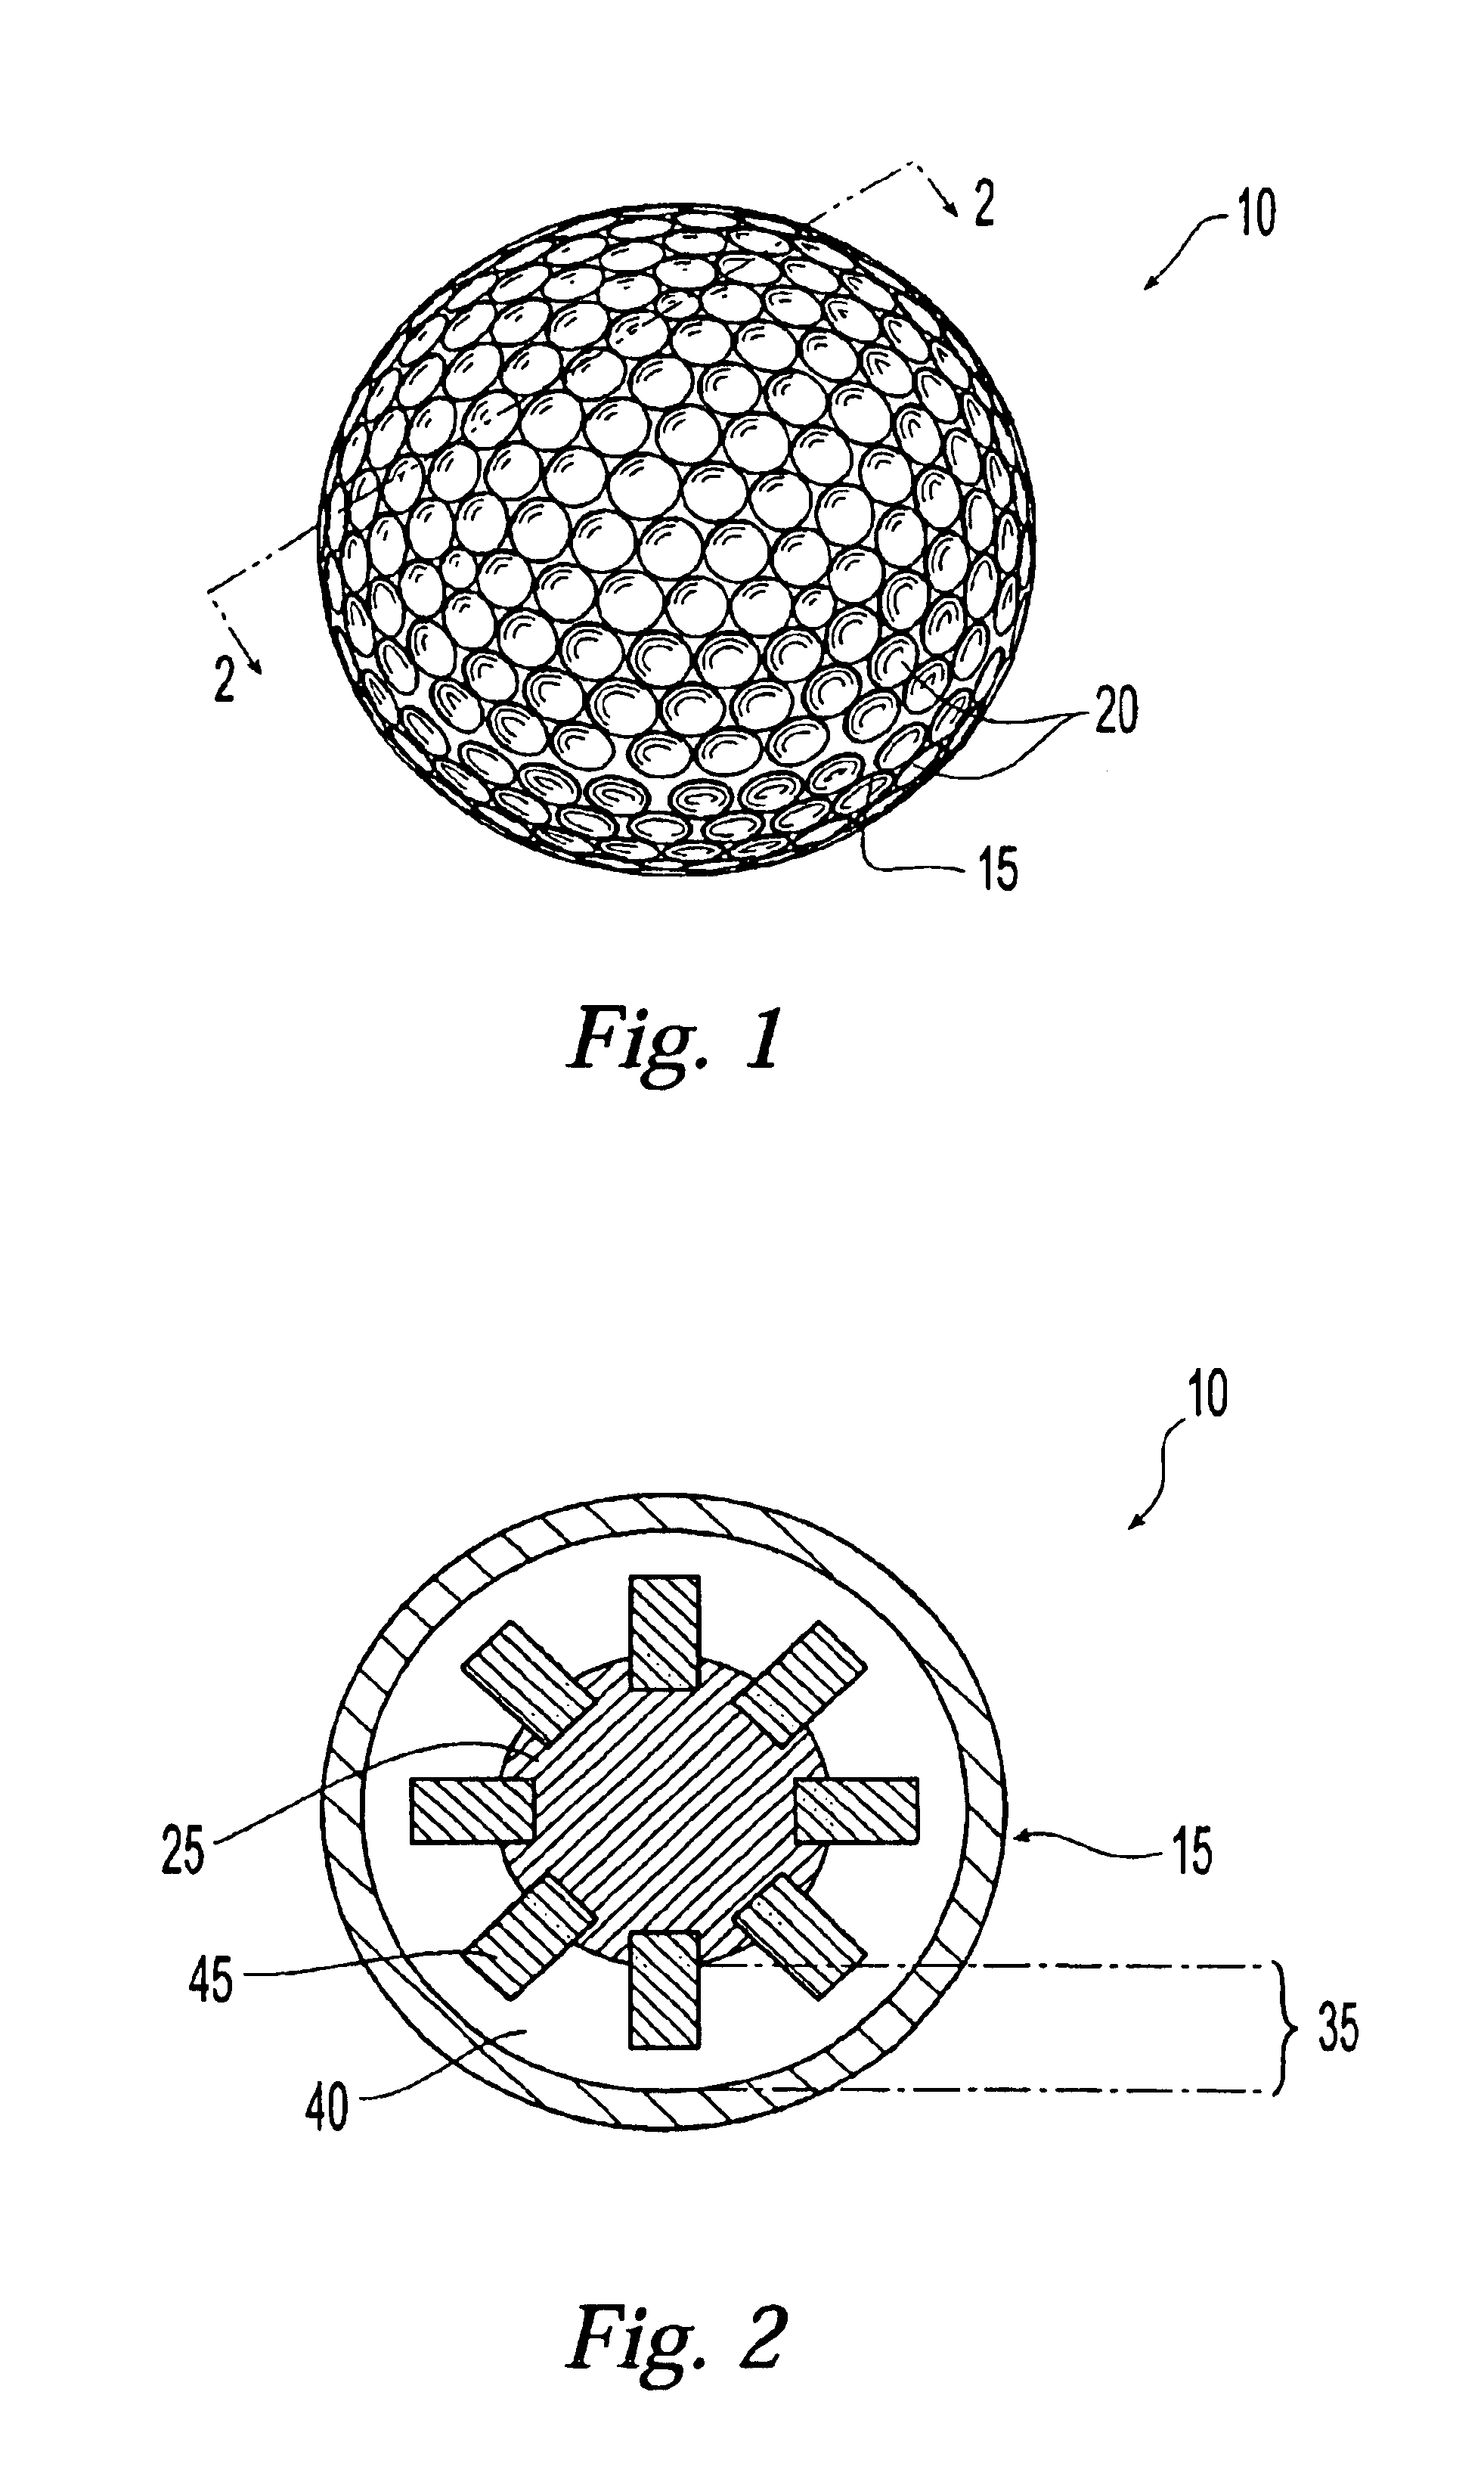 Golf ball with an improved intermediate layer